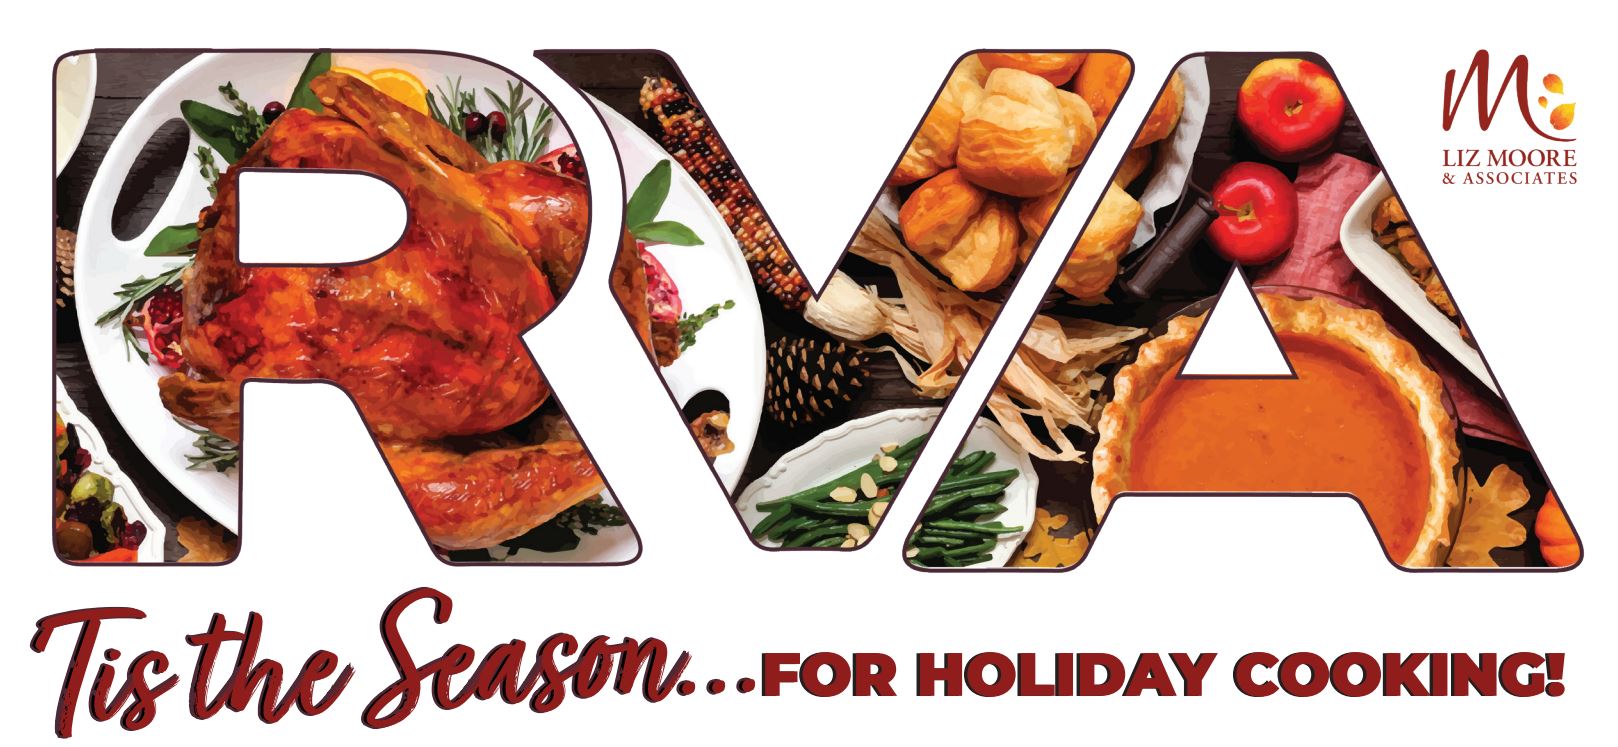 Support Local Businesses in Richmond, Virginia When Cooking this Holiday Season